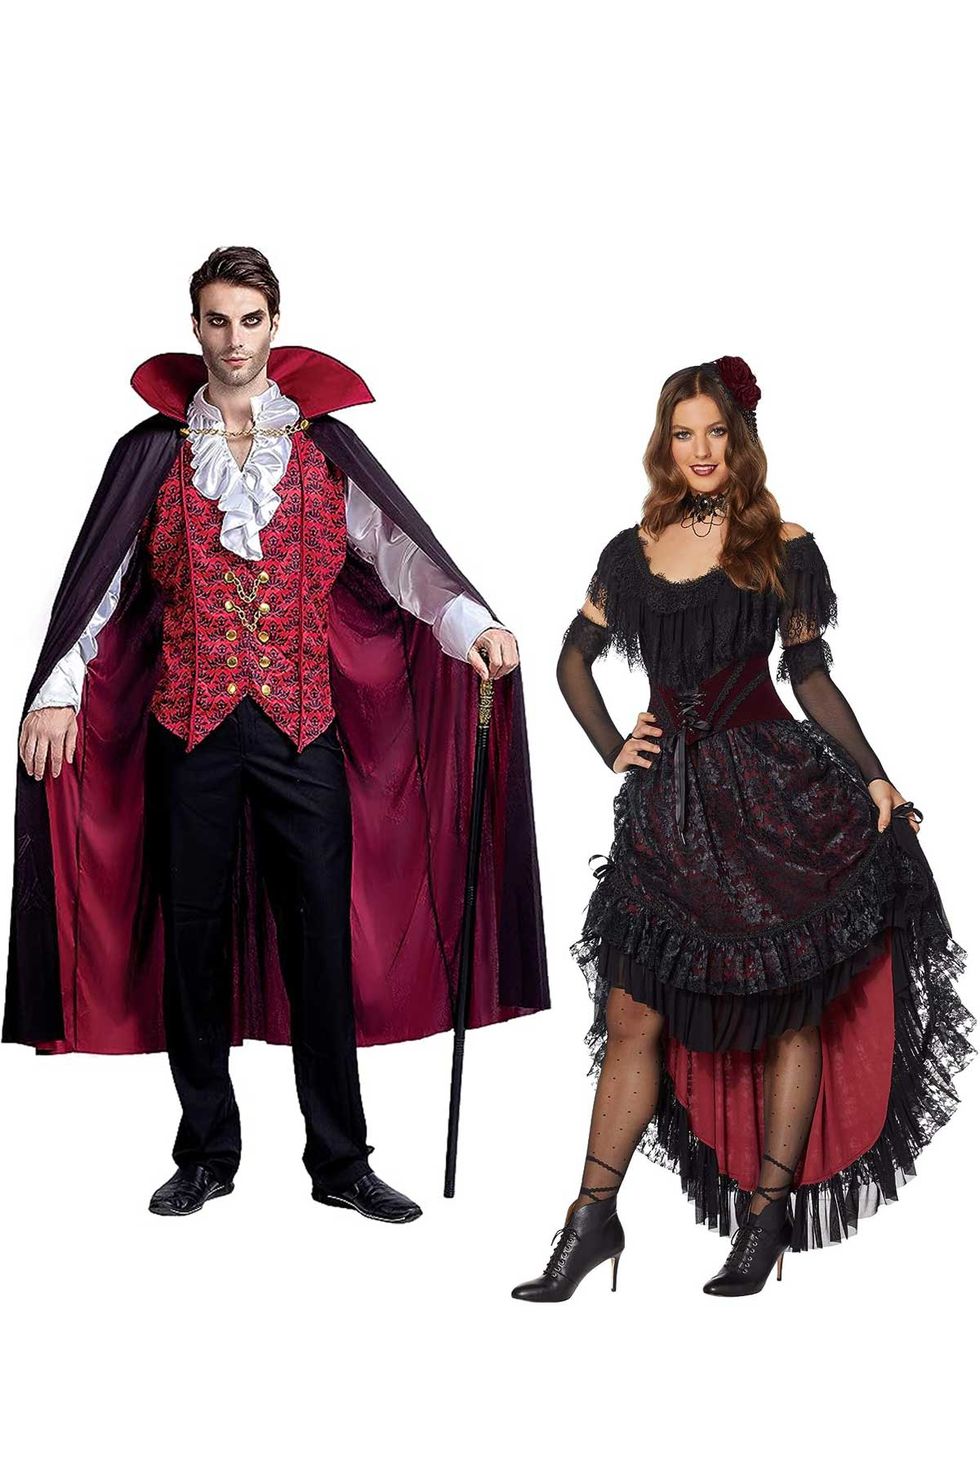 scary couples costumes gothic vampires